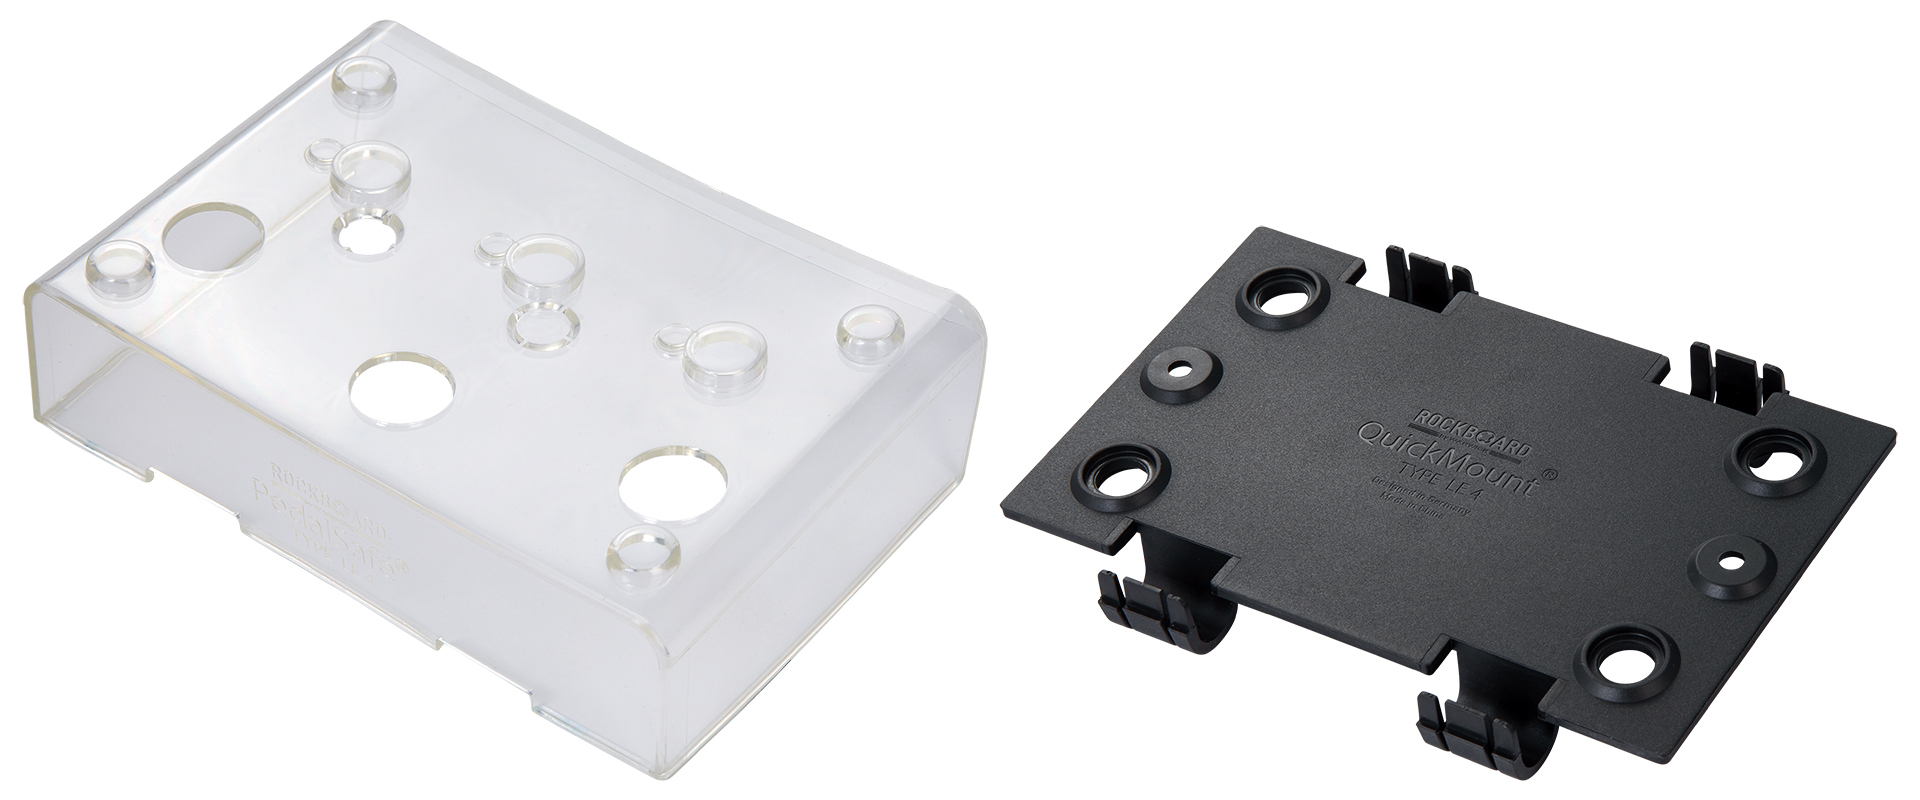 RockBoard PedalSafe Type LE4 - Protective Cover and Rockboard Mounting Plate for LEHLE Dual, LEHLE D.Loop, 3@1, 1@3 pedals